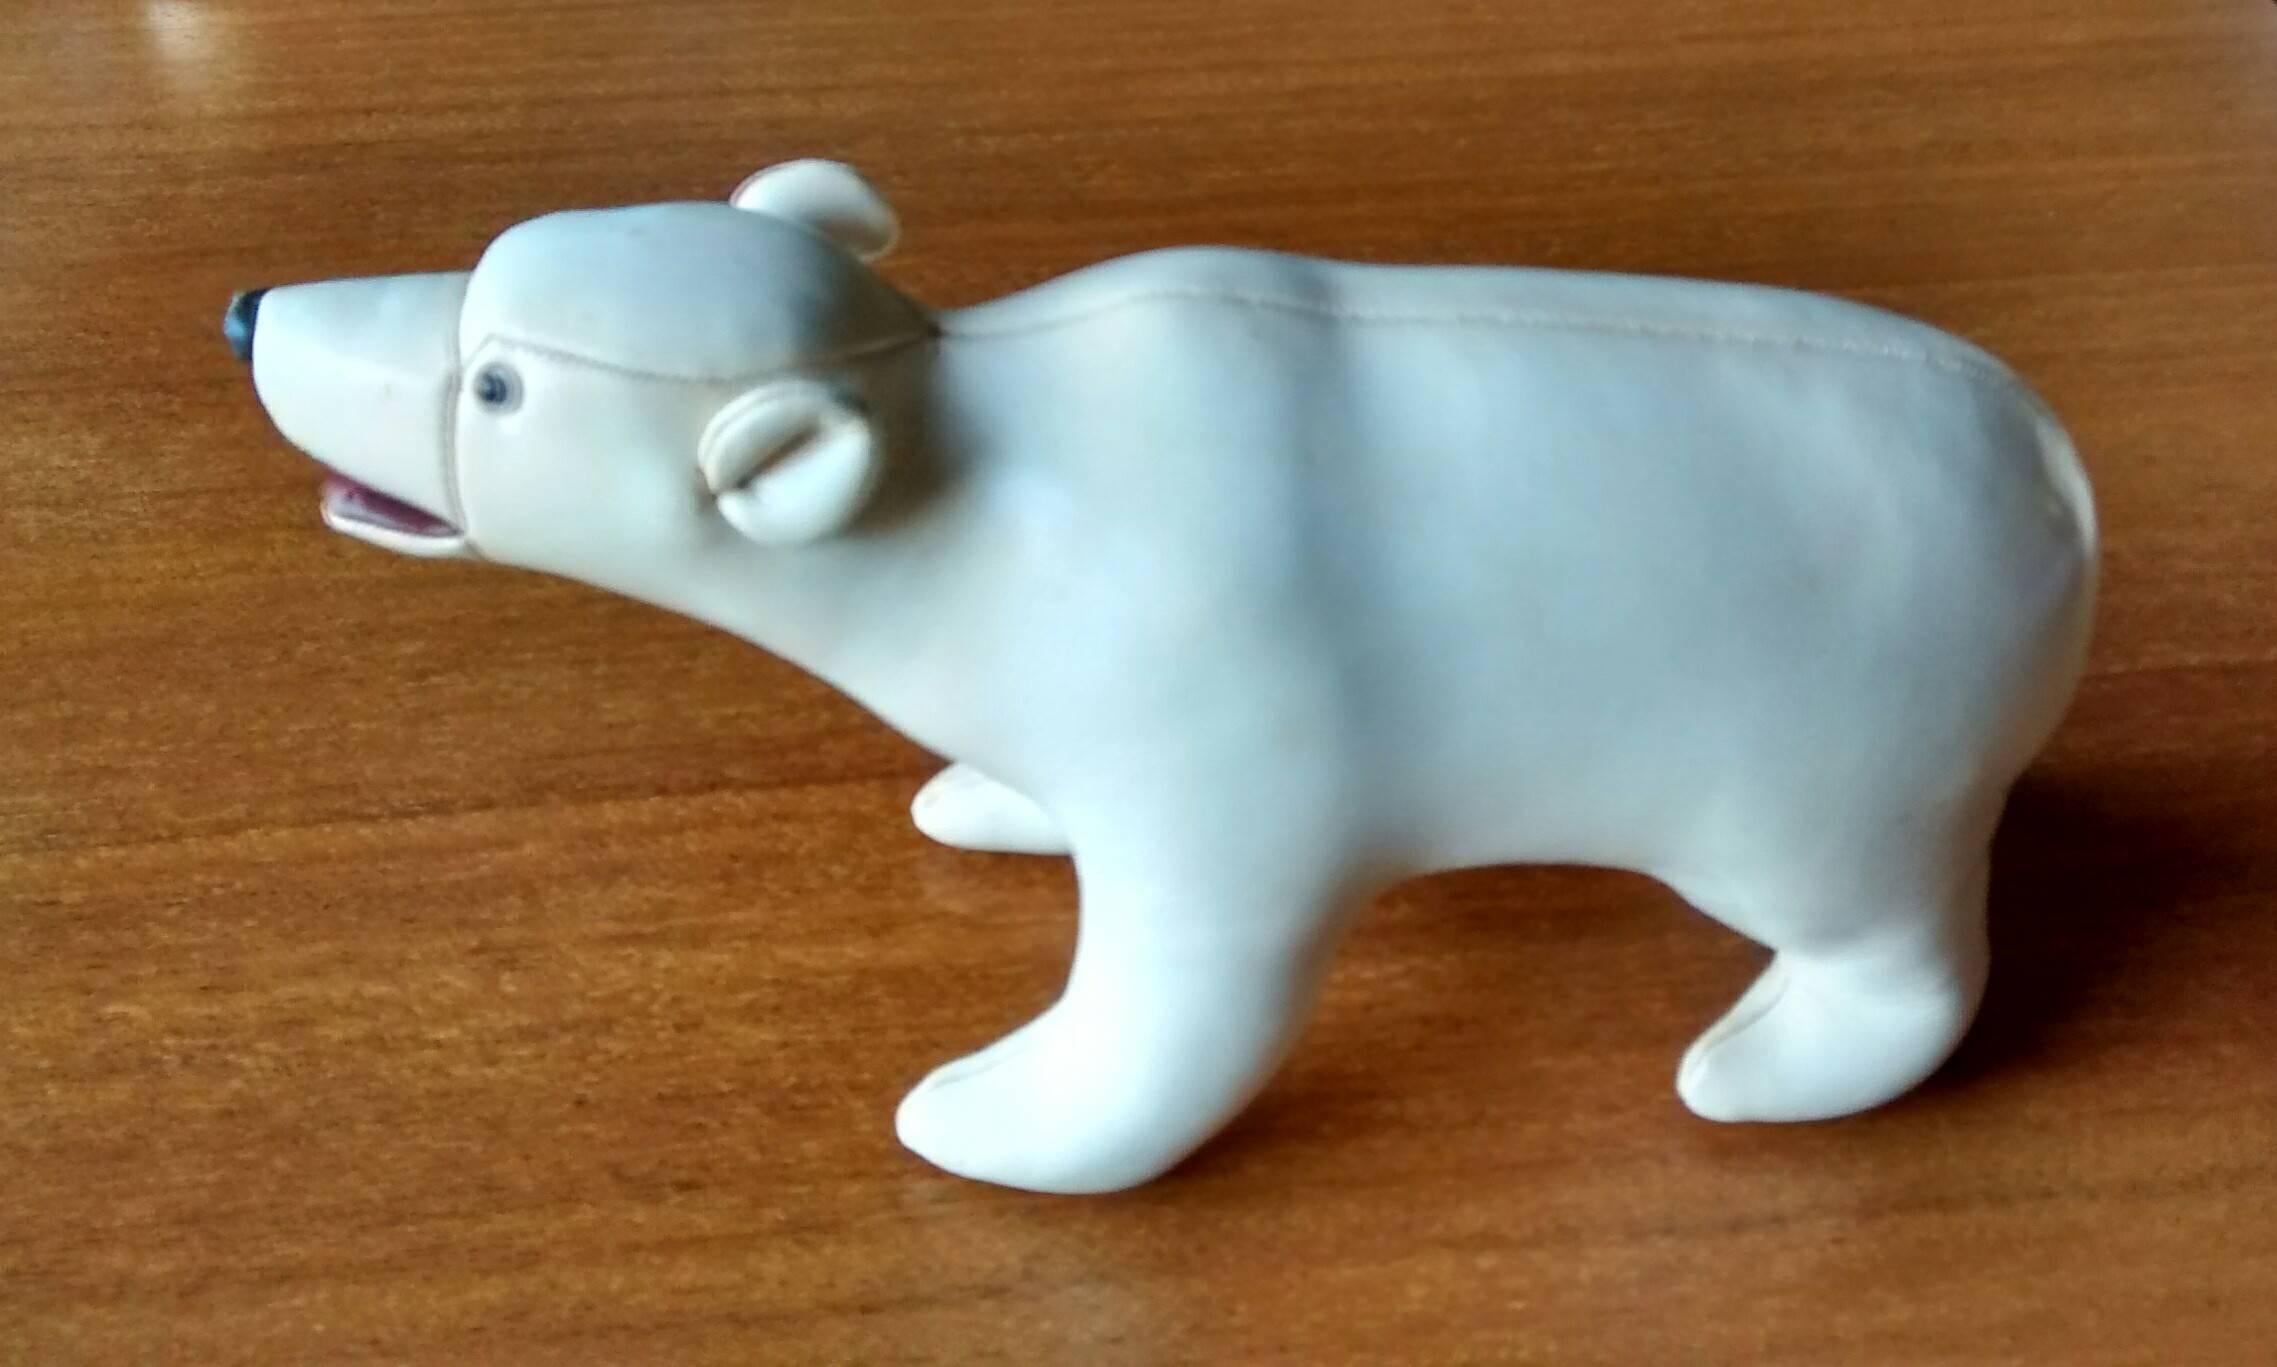 Kid glove leather covered polar bear figure by Tomi of Japan, dating to the 1960's. Similar quality to the Abercrombie leather pigs you see frequently. 

The tactile nature of this little figure can't be underestimated when you see it. Soft,